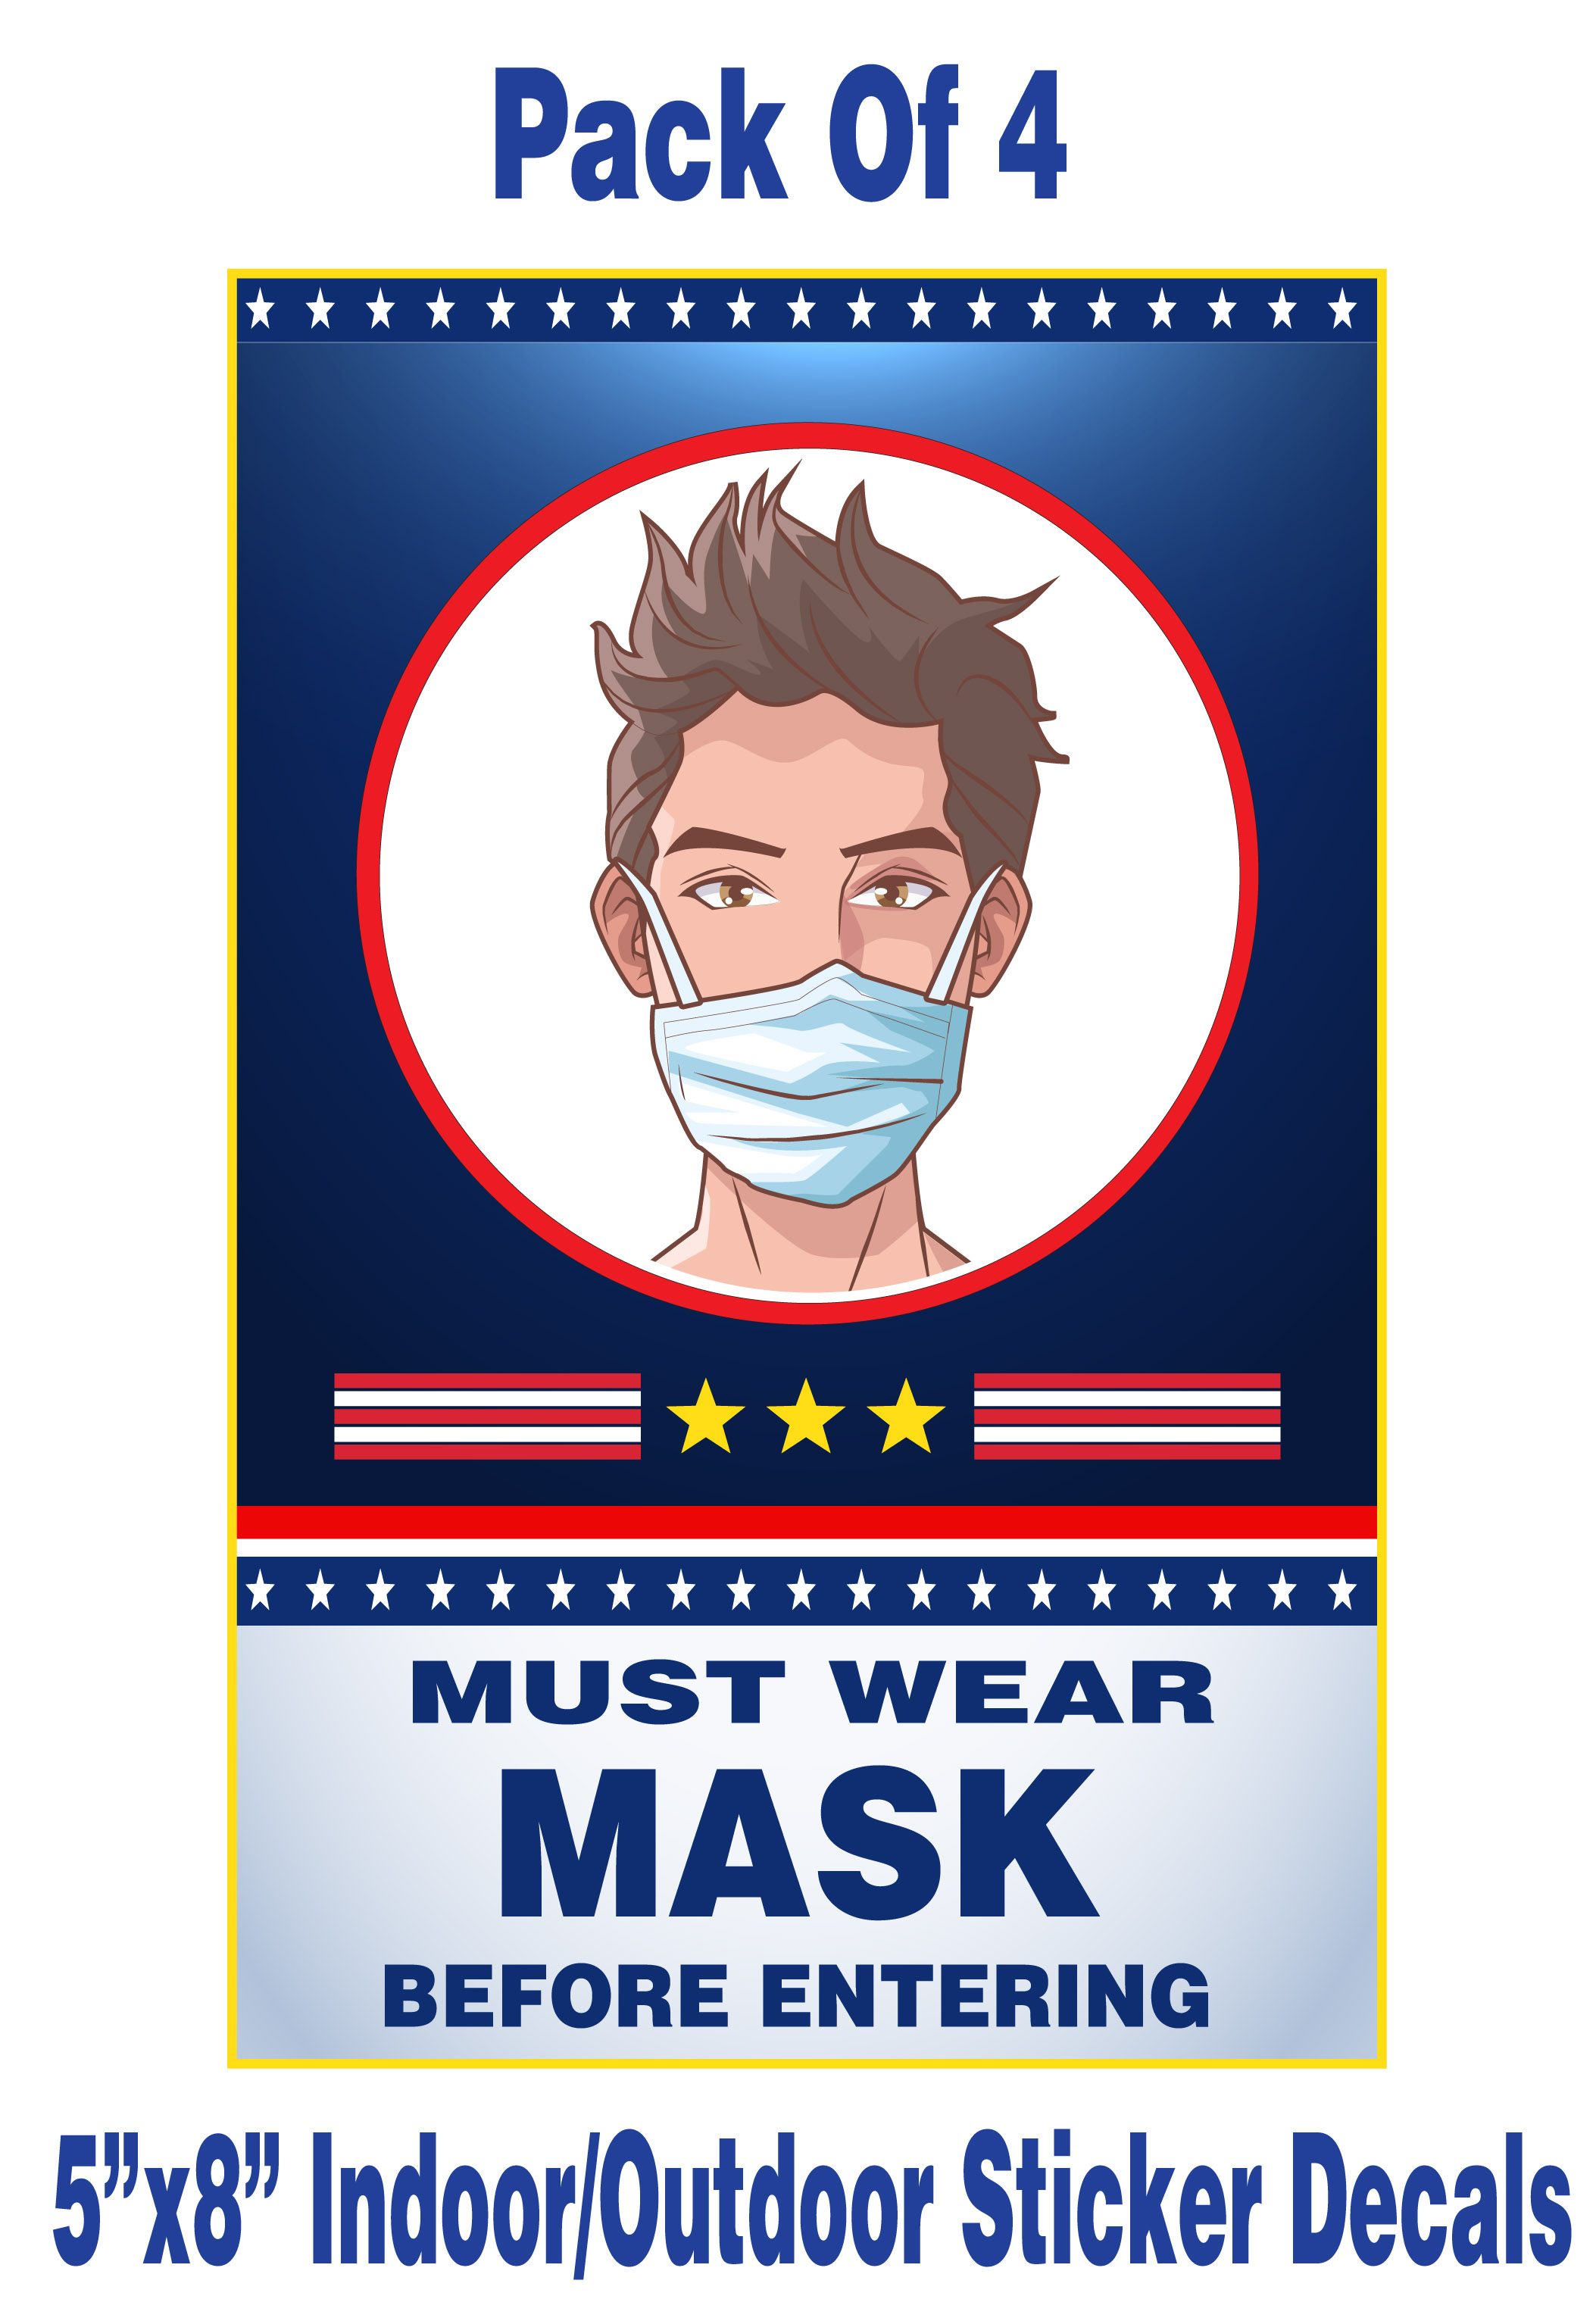 Body Temperature Check Sign 3 Pack 8 x 10 Adhesive Scratch Resistant Vinyl Removable All in One Signage Pack for Businesses Face Mask Required Sign Maintain Social Distancing Sign